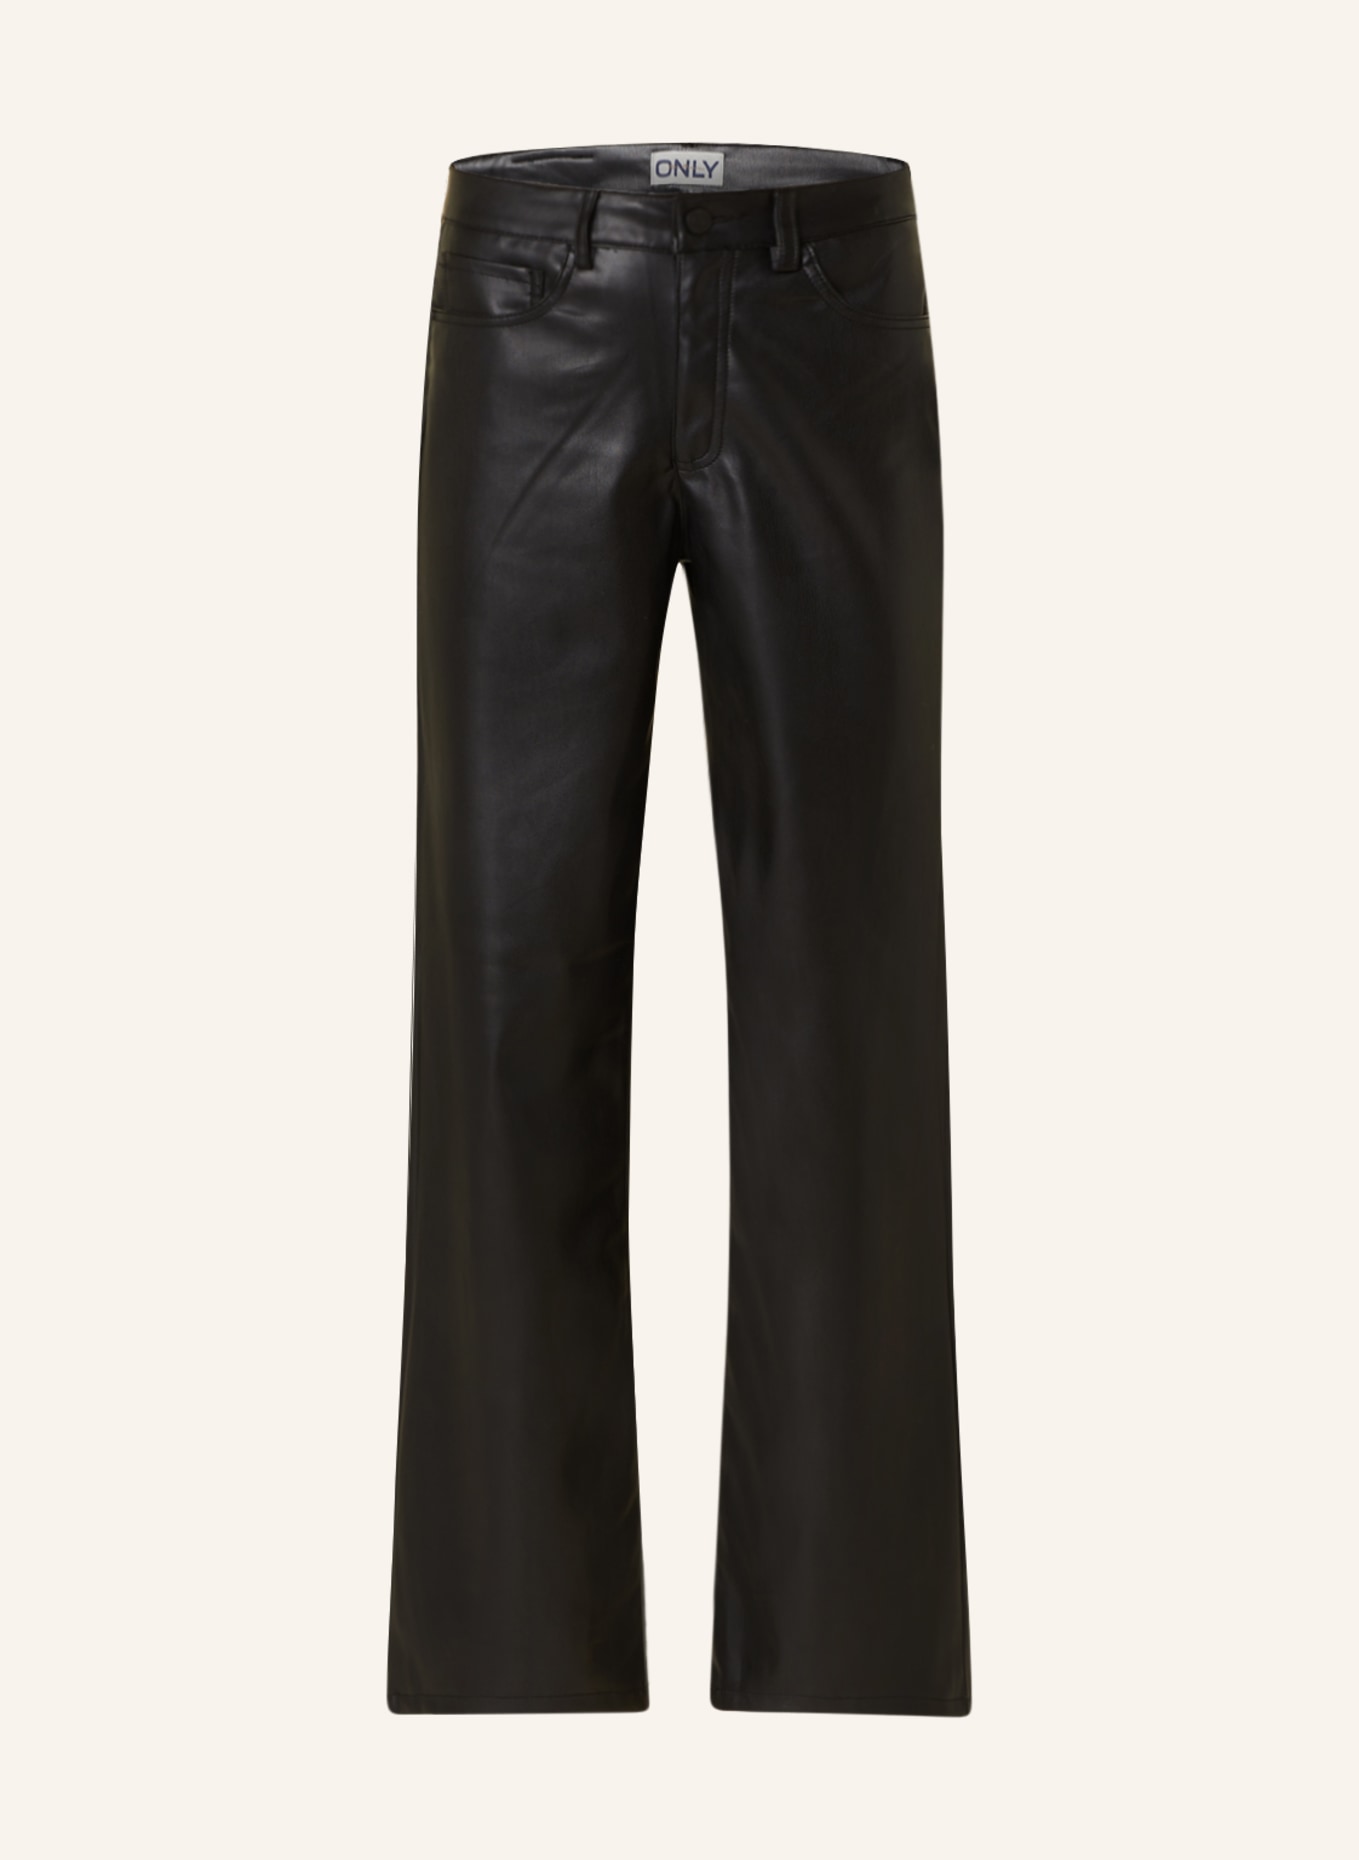 ONLY Pants in leather look, Color: BLACK (Image 1)